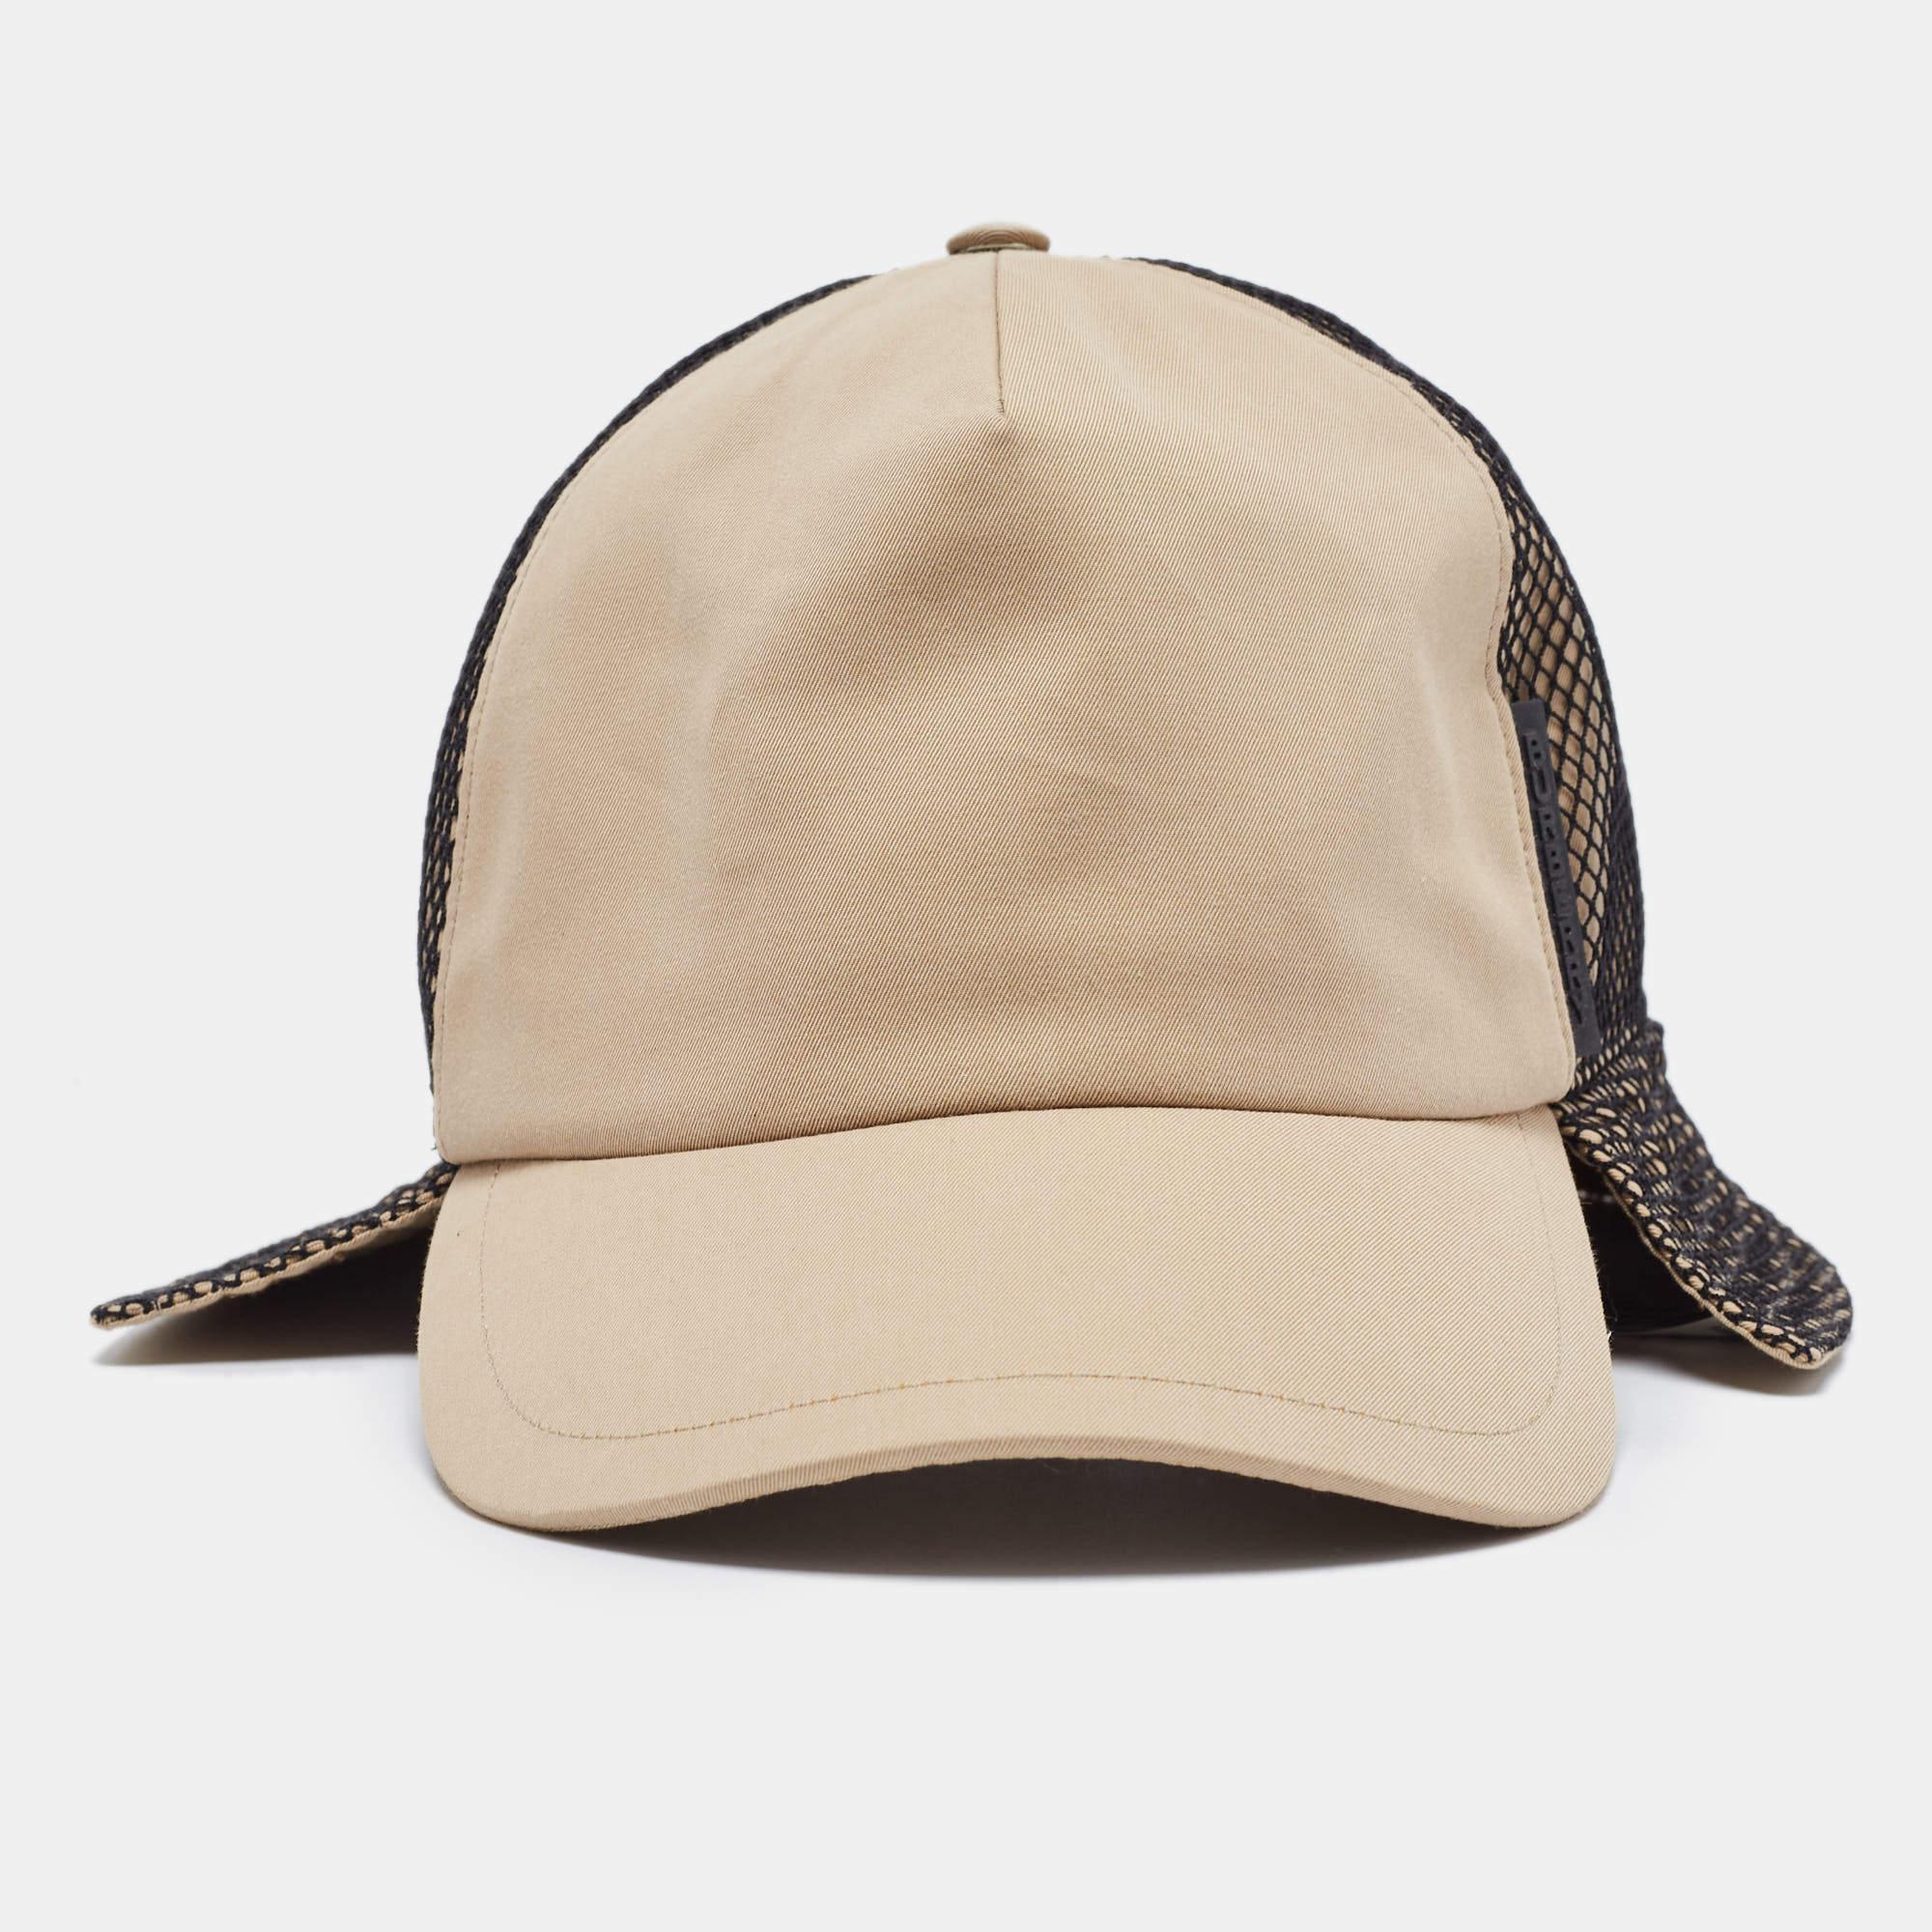 The Burberry hat combines classic elegance with contemporary flair. Crafted from premium beige cotton, it features a mesh panel for breathability. This hat is a versatile accessory, blending style and functionality effortlessly.

Includes: Brand Tag